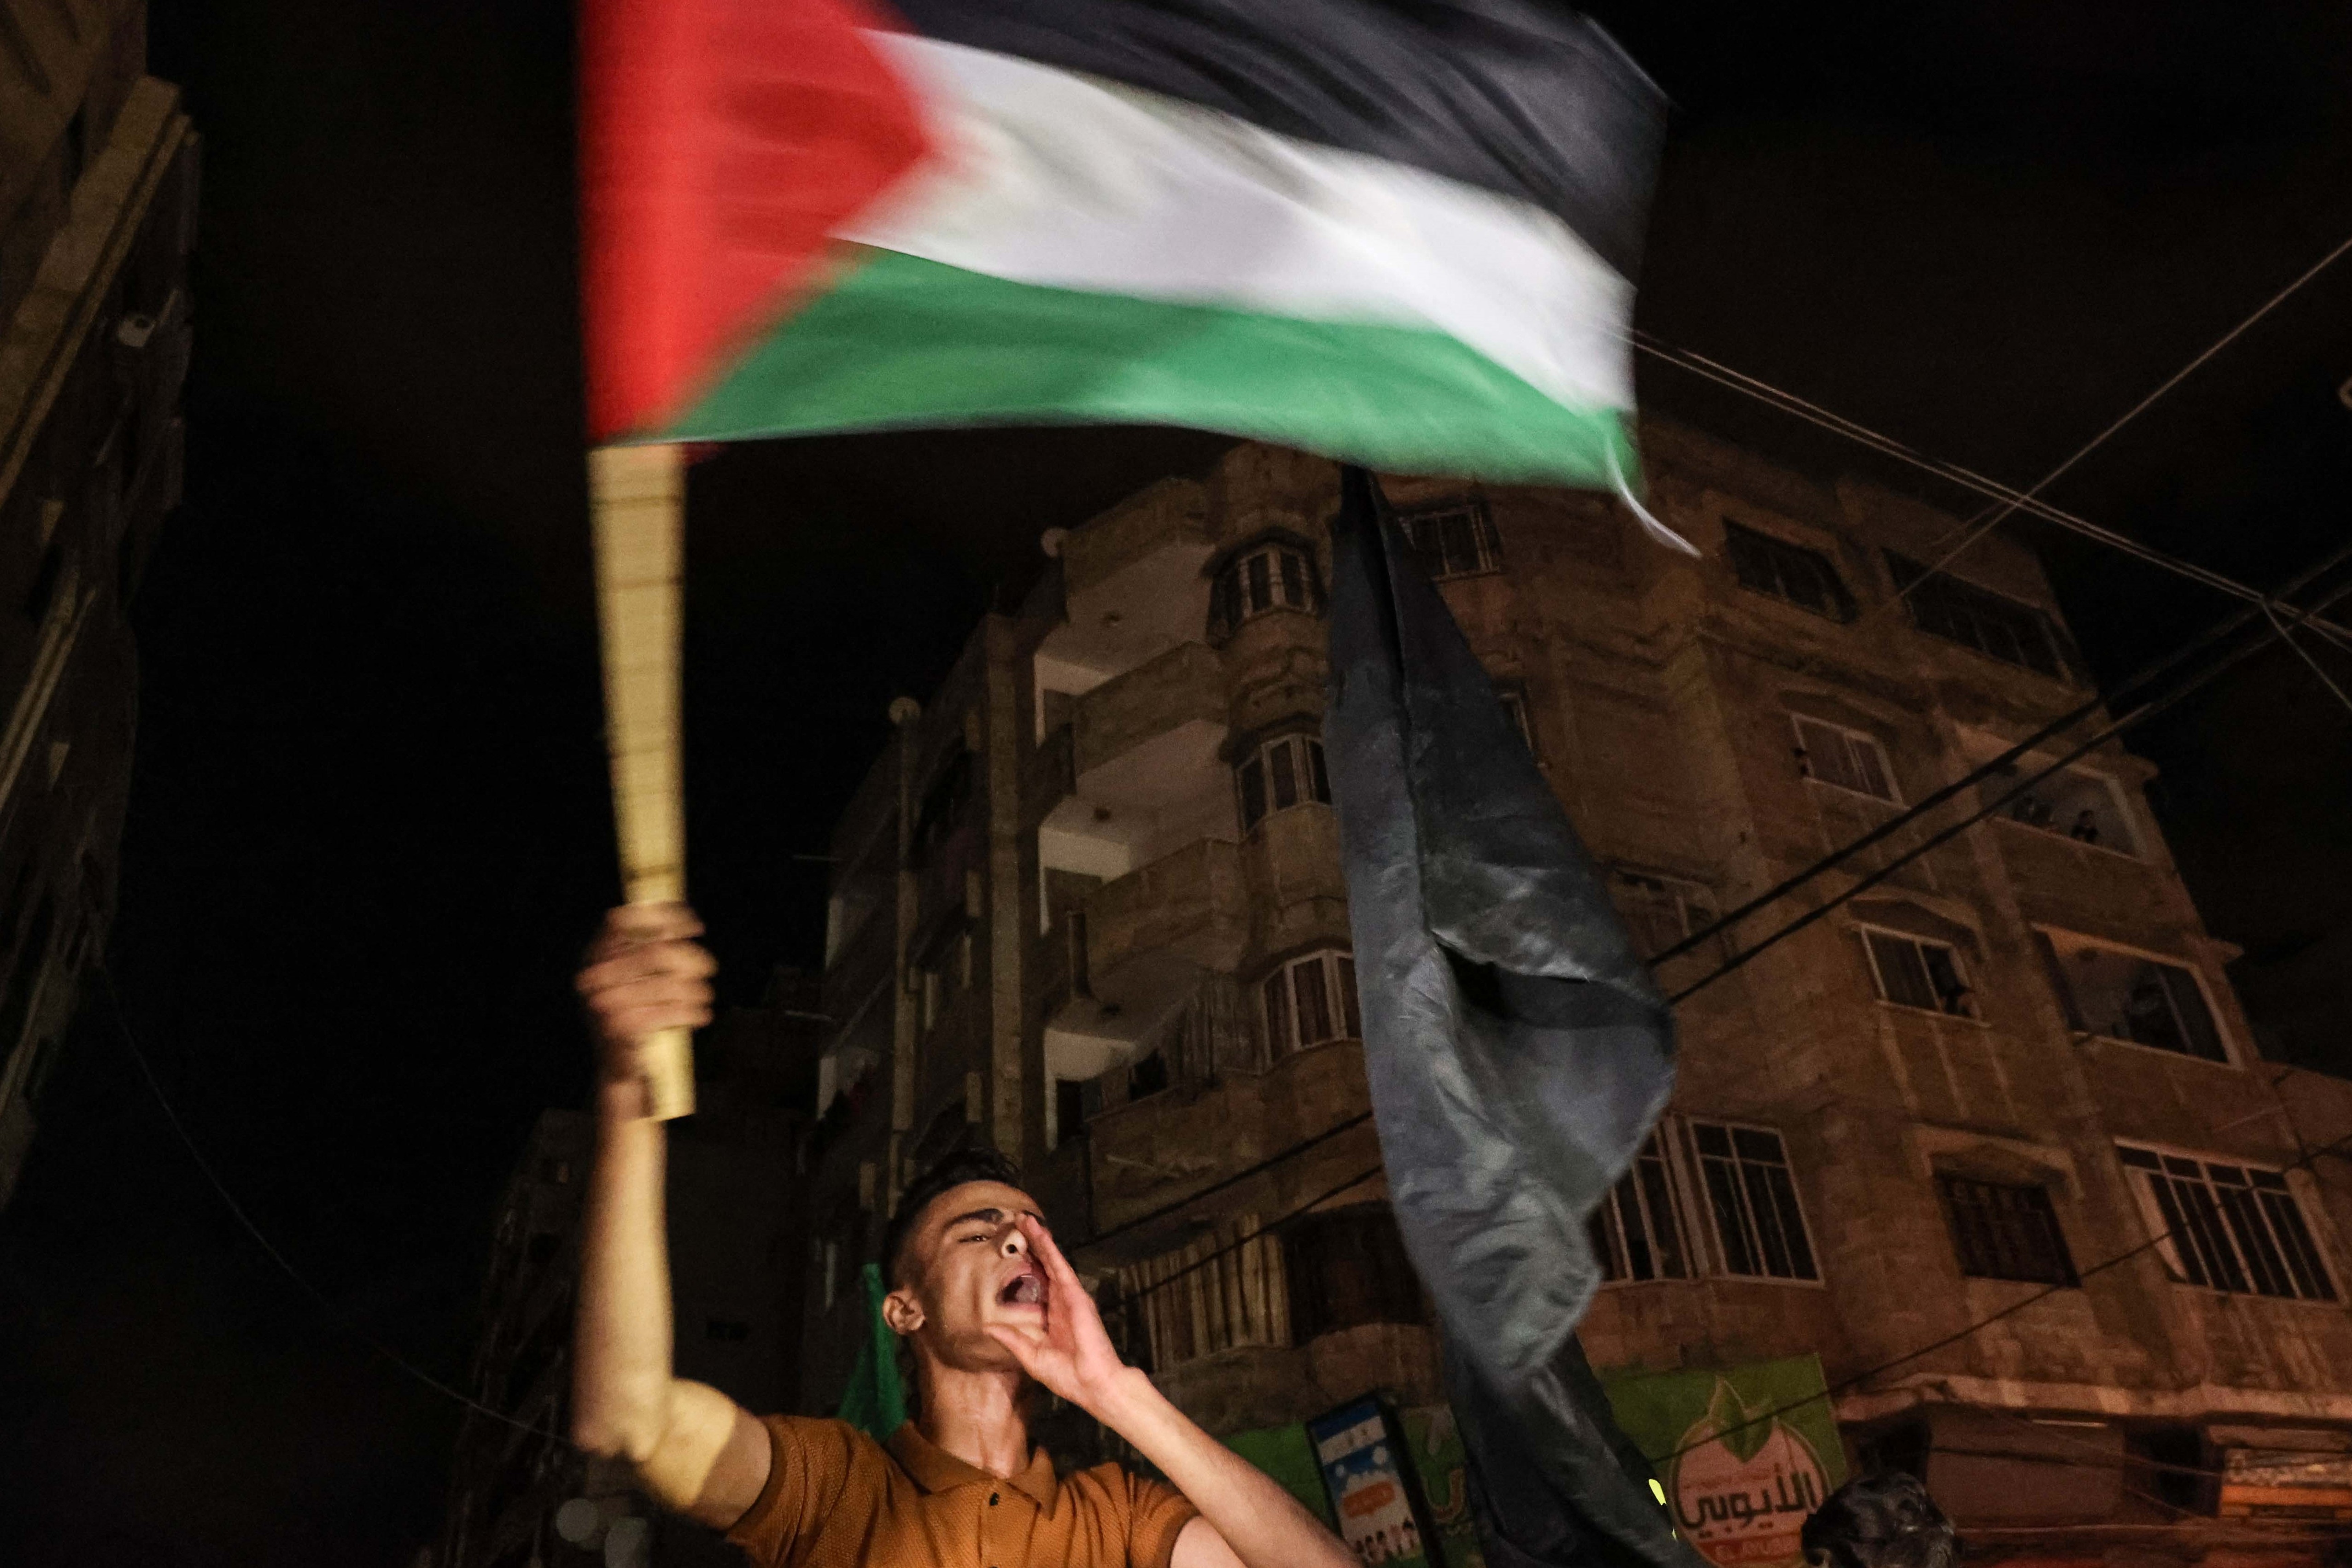 A man waves the Palestinian flag as people celebrate the ceasefire brokered by Egypt between Israel and the two main Palestinian armed groups in Gaza City on May 21, 2021.